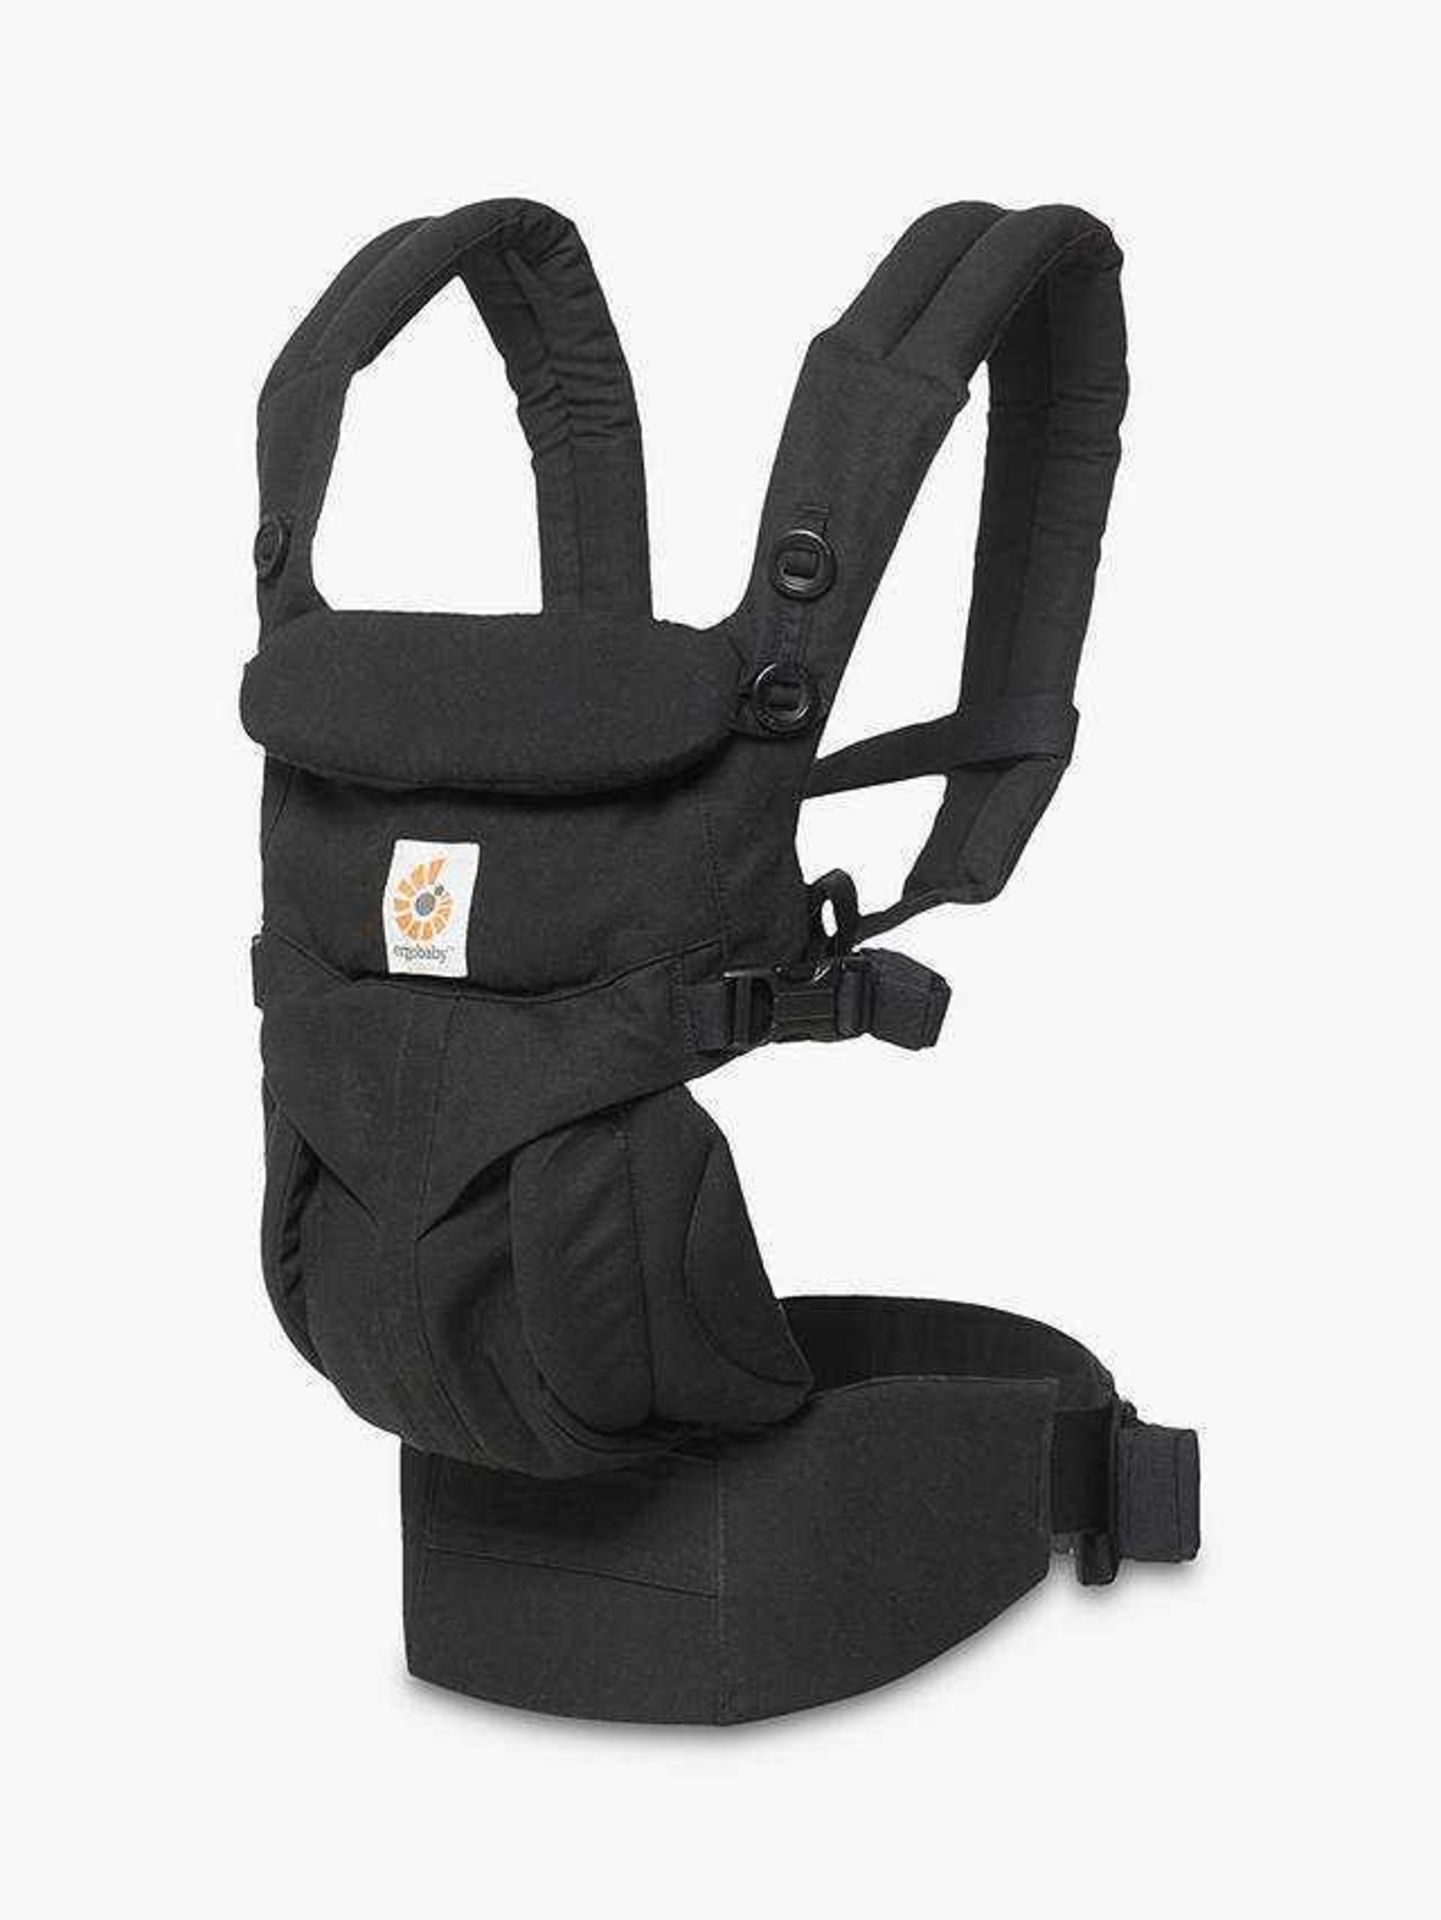 Rrp £155 Ergobaby Omni 360 Support Baby Carrier